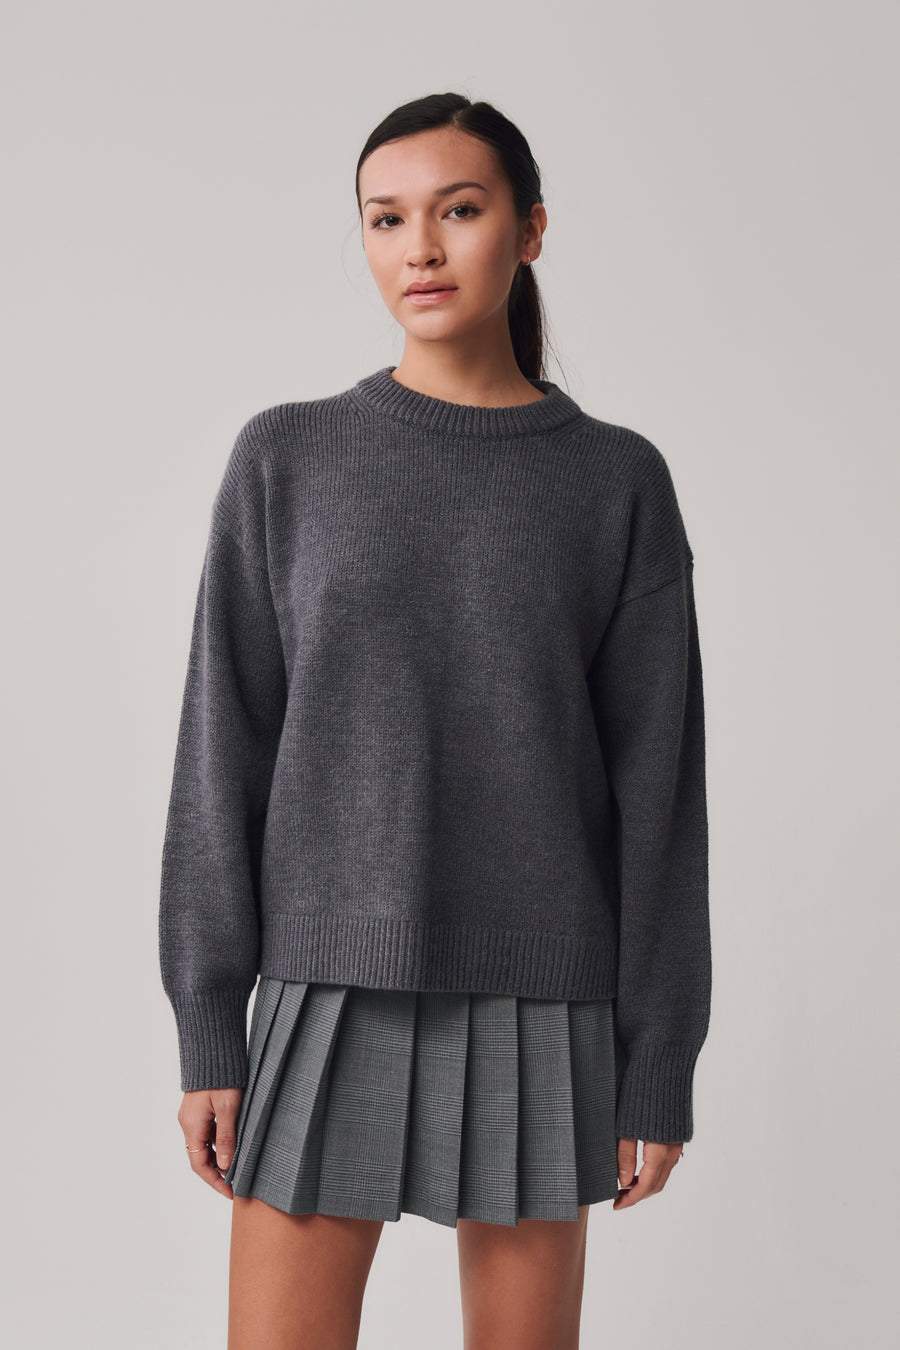 Romi Knit Pullover + Gray - Little Puffy